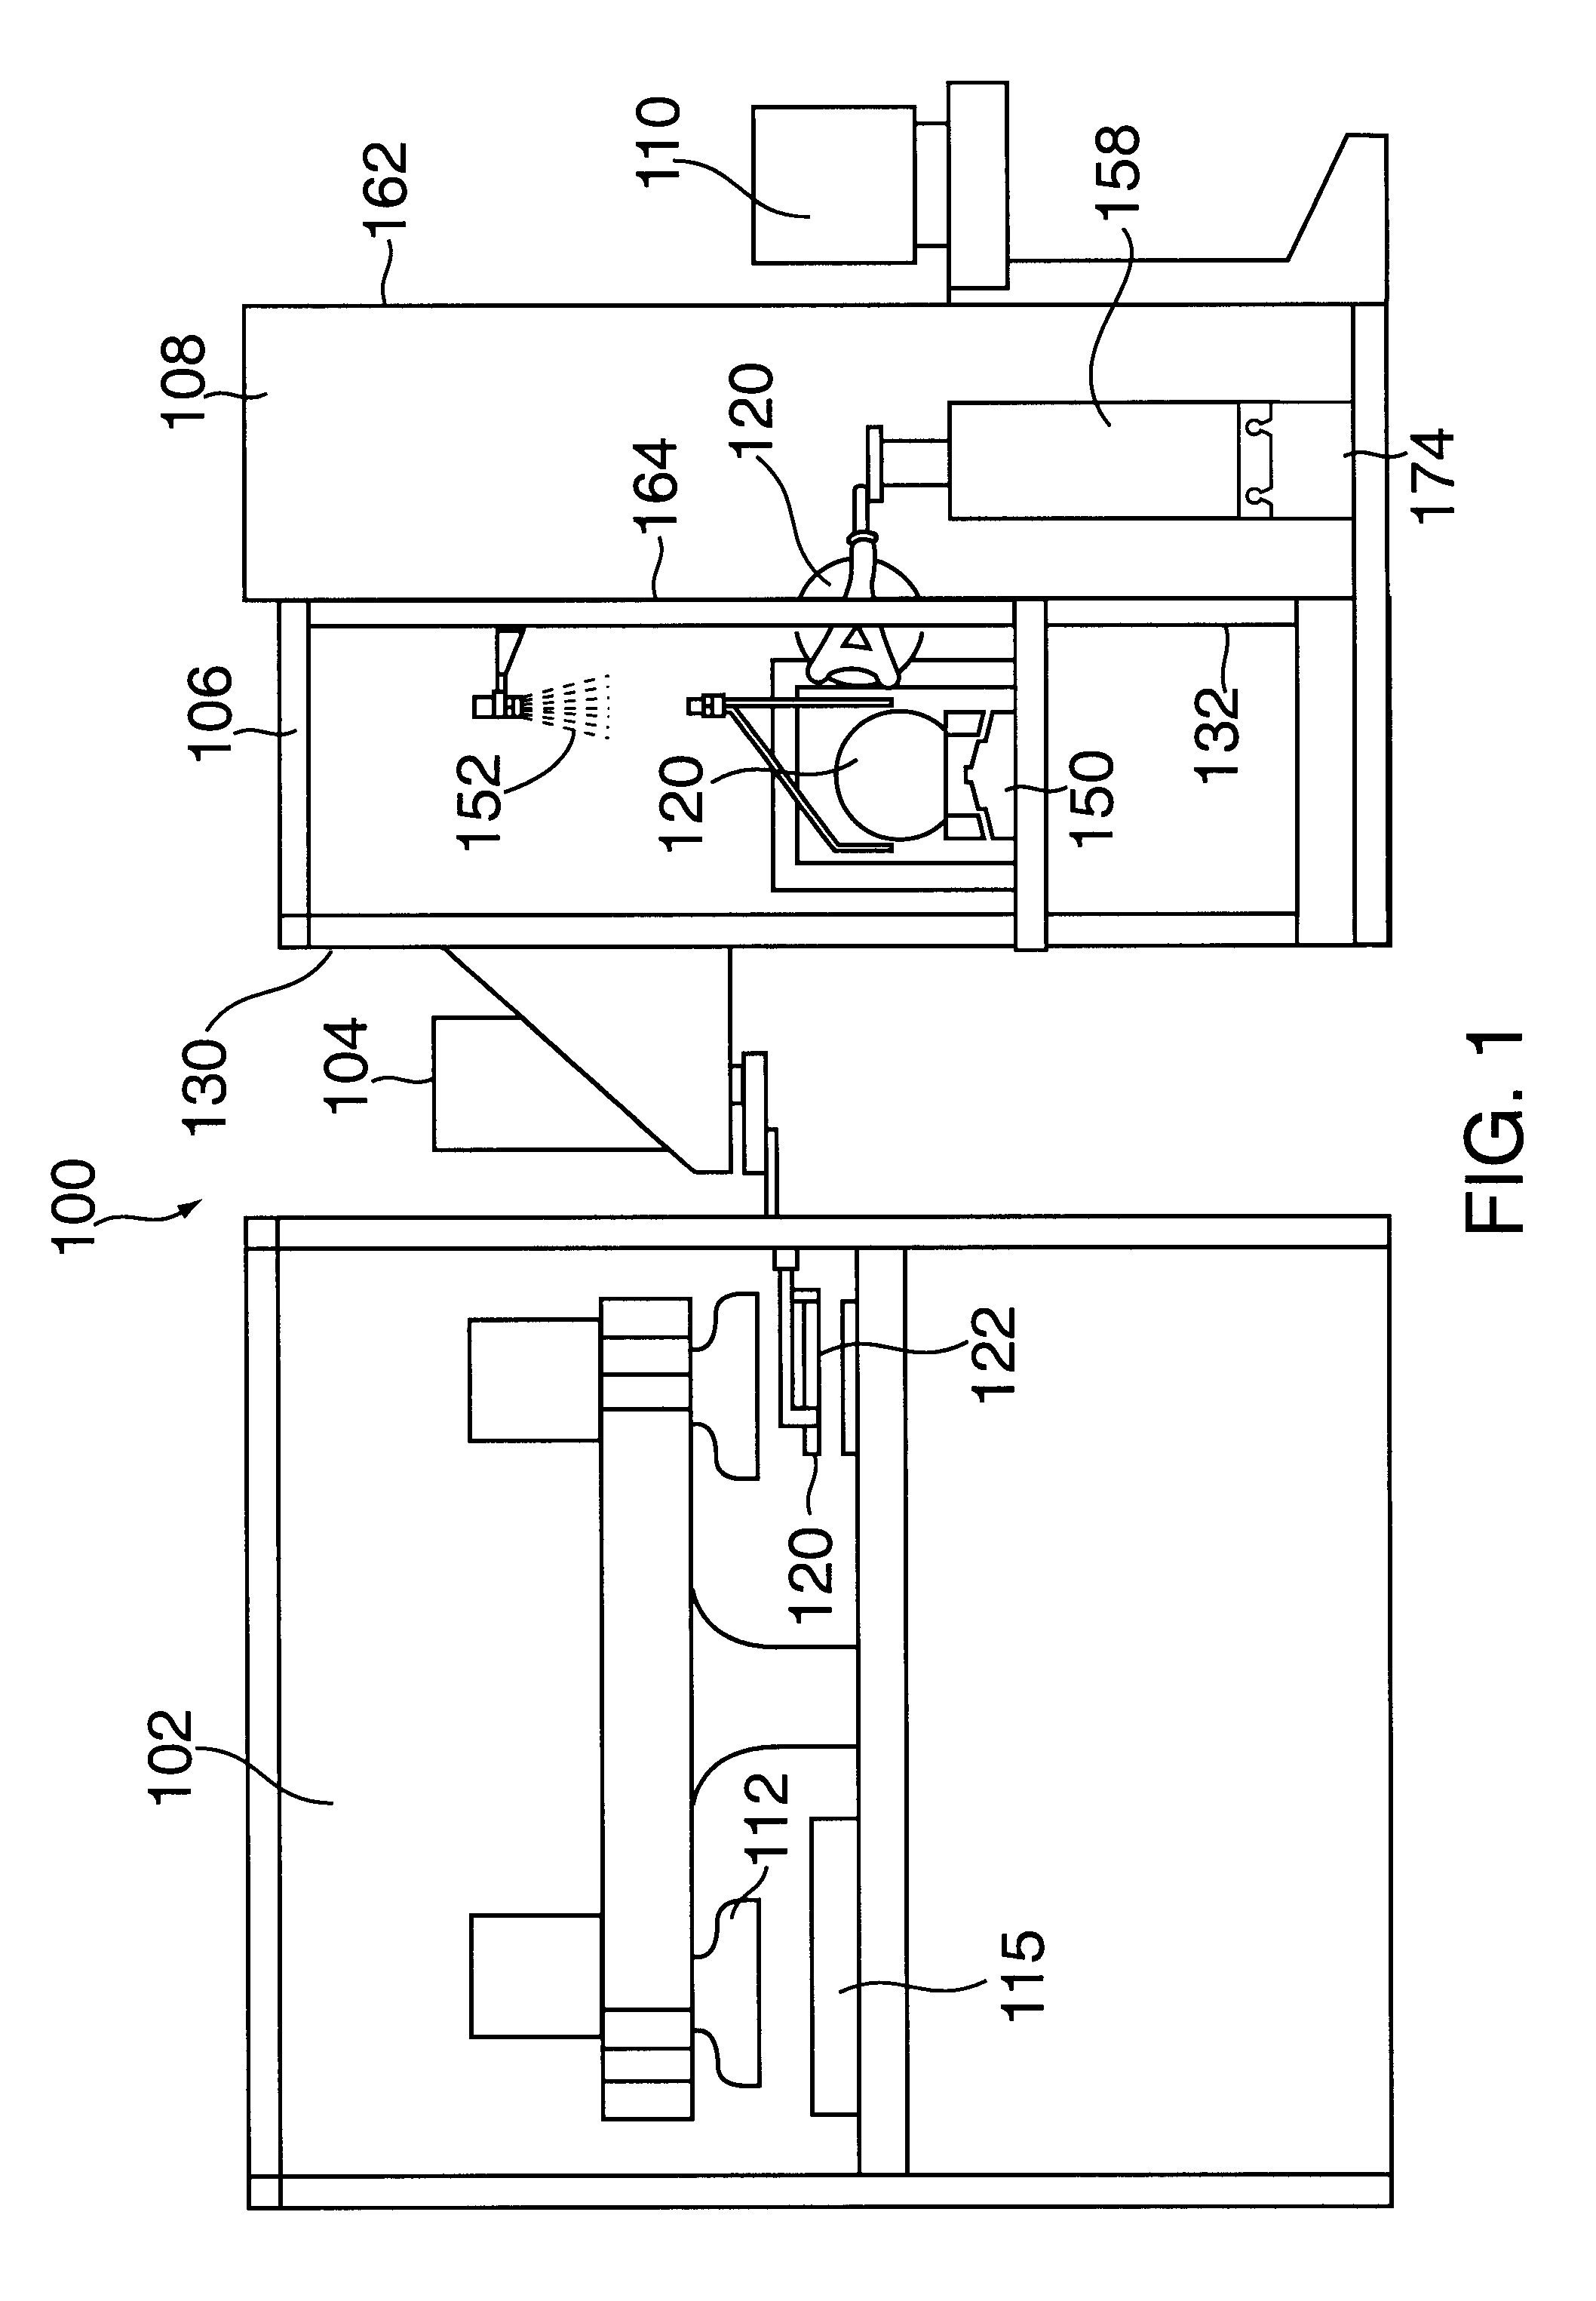 Method and apparatus for transferring semiconductor substrates using an input module